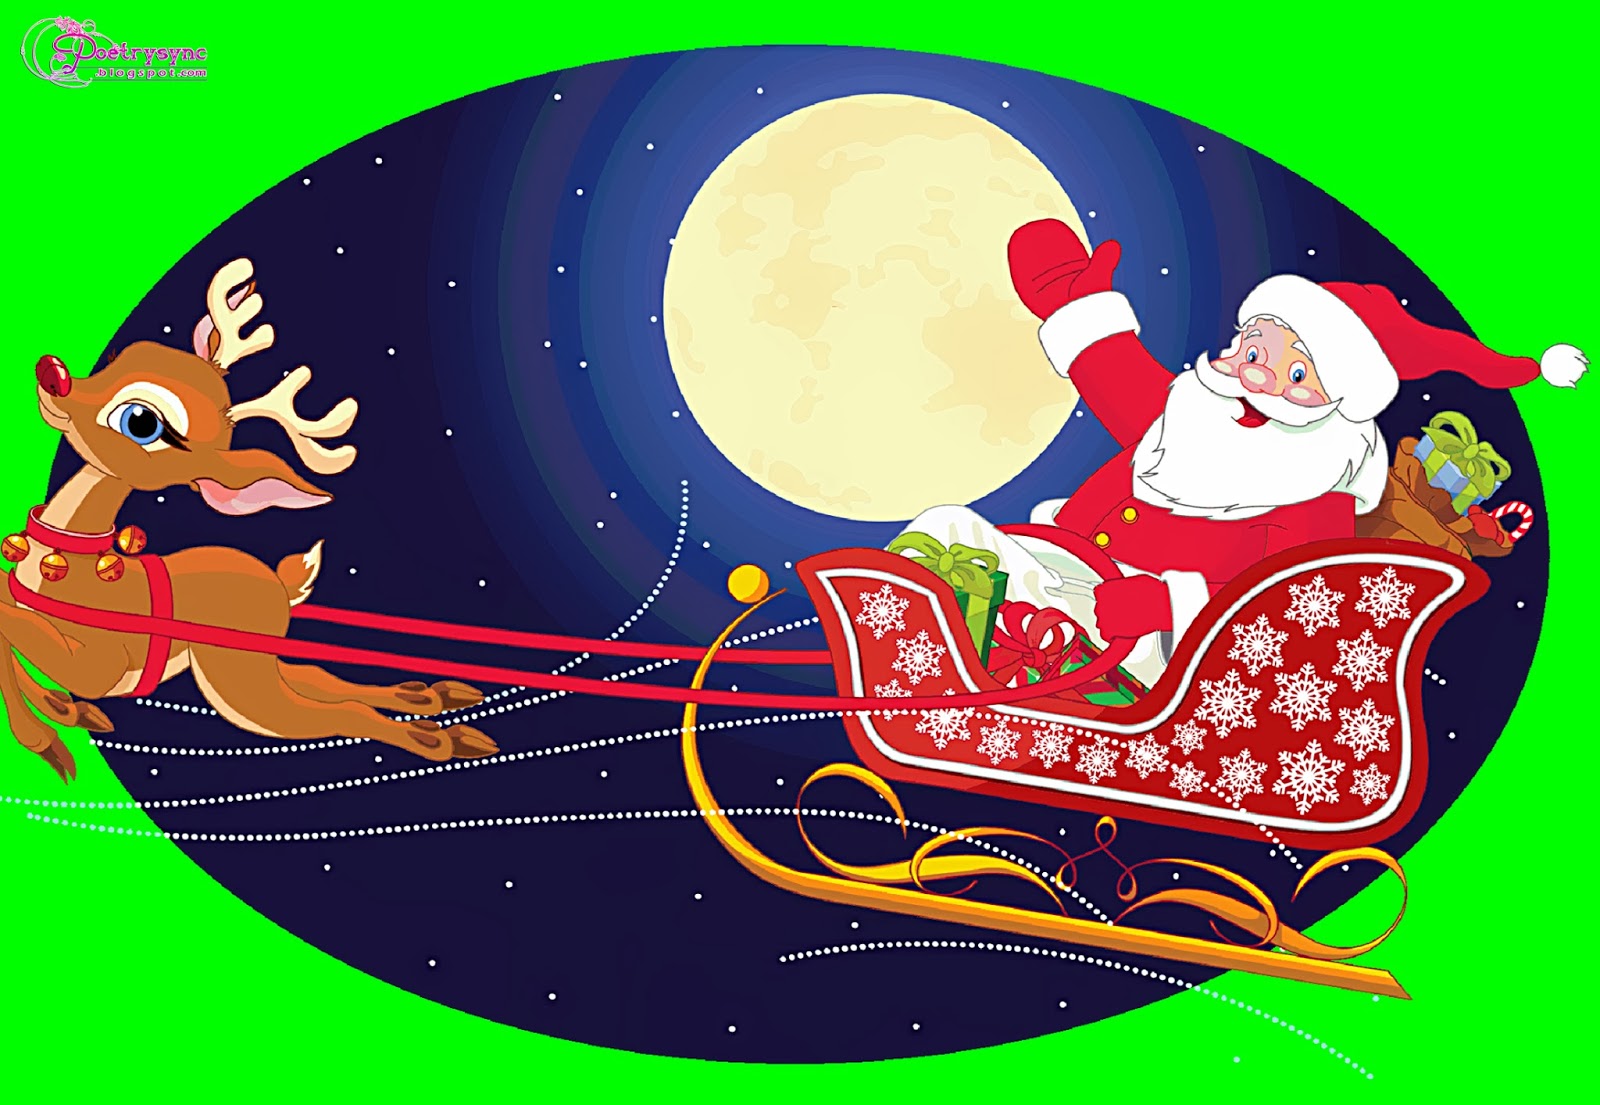 Santa claus hd cliparts and pictures for christmas festival